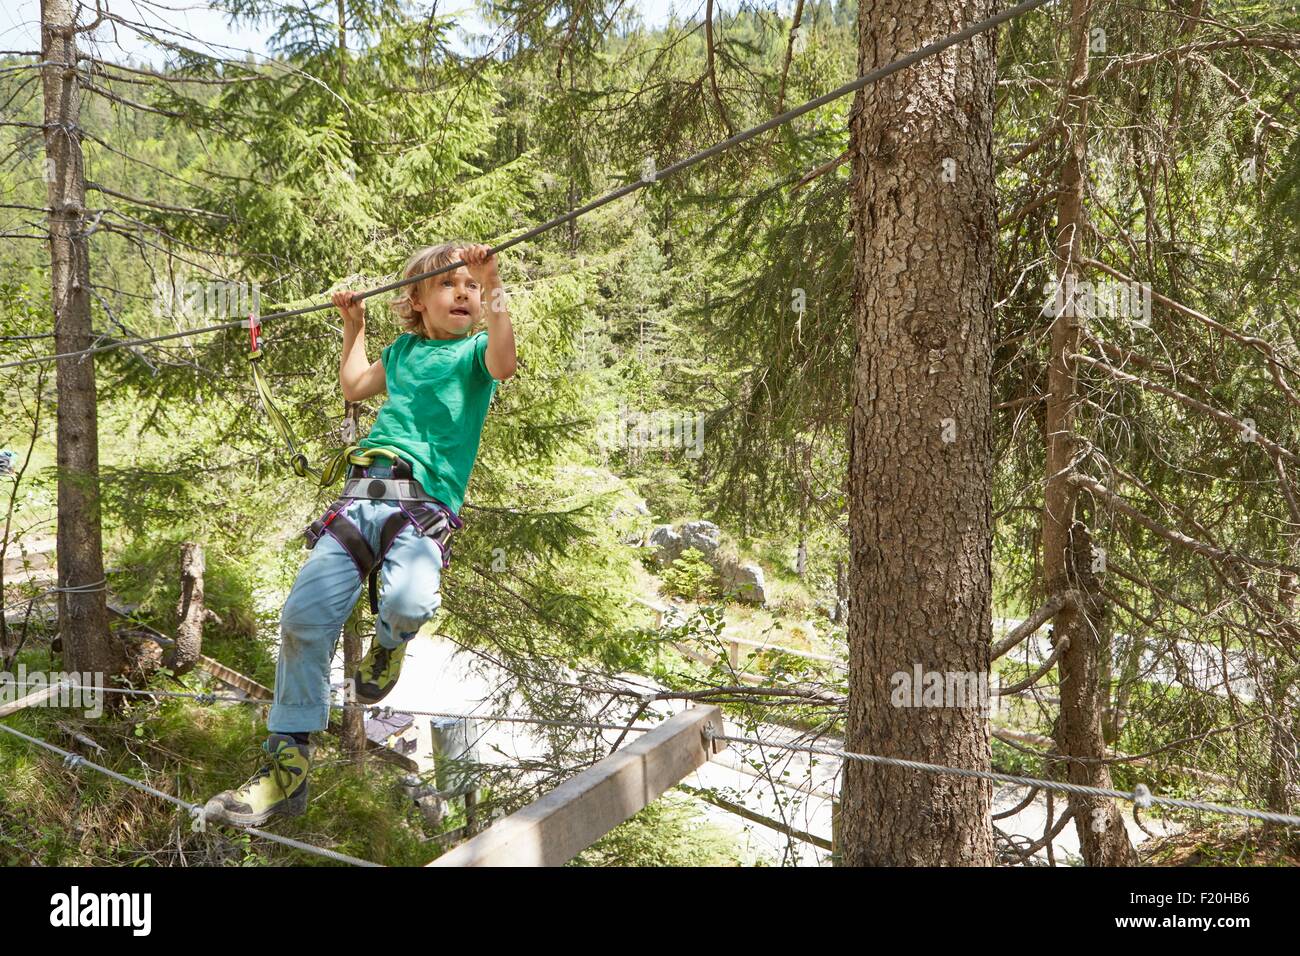 Boy moving along rope in forest, Ehrwald, Tyrol, Austria Stock Photo